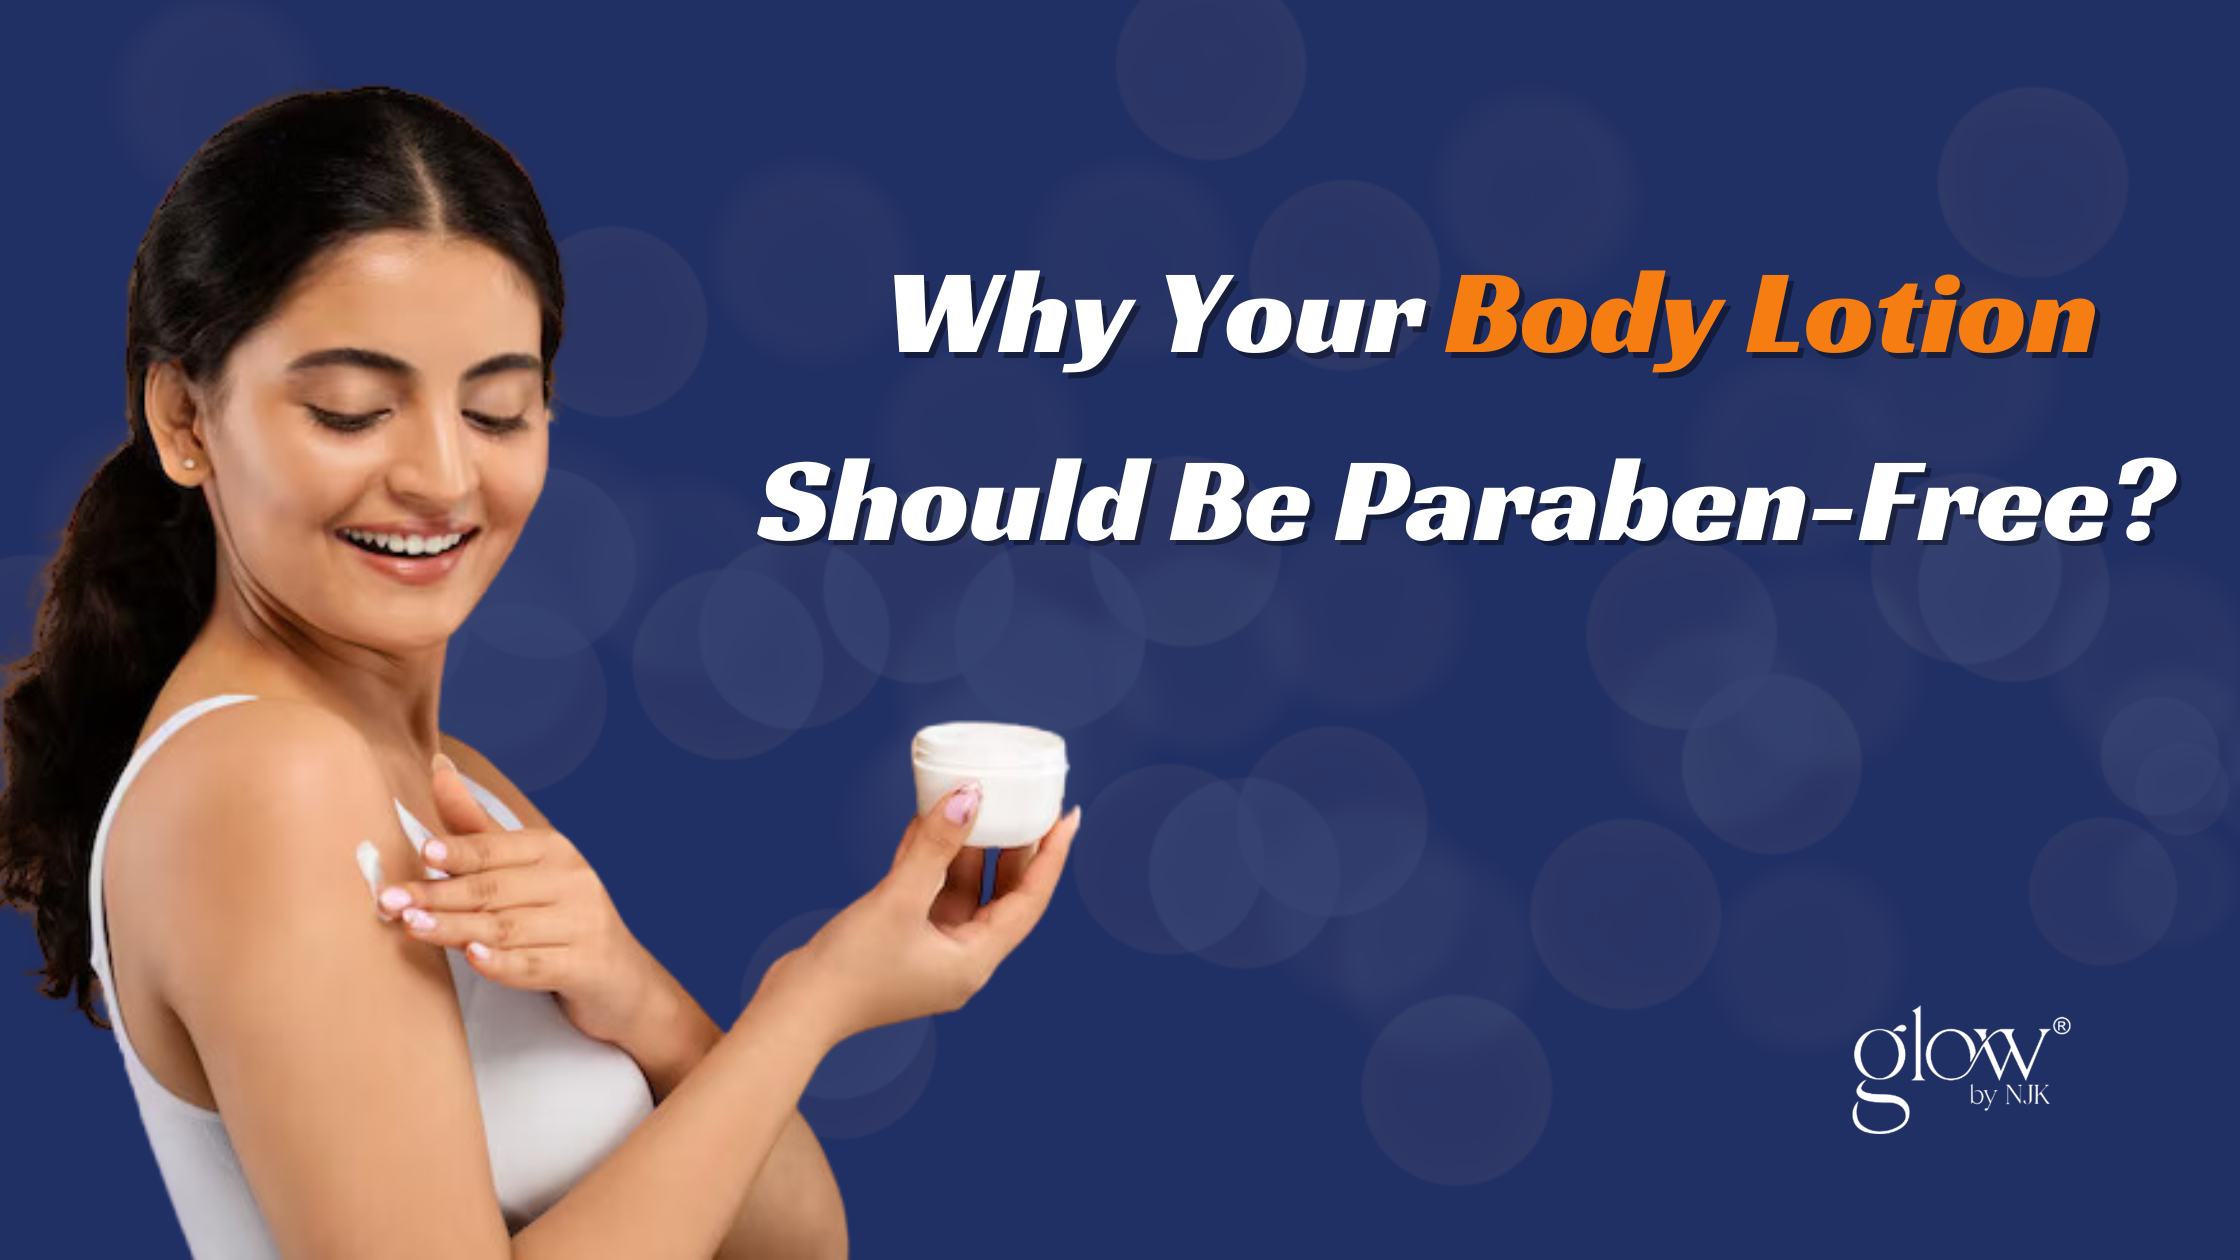 Why Your Body Lotion Should Be Paraben-Free